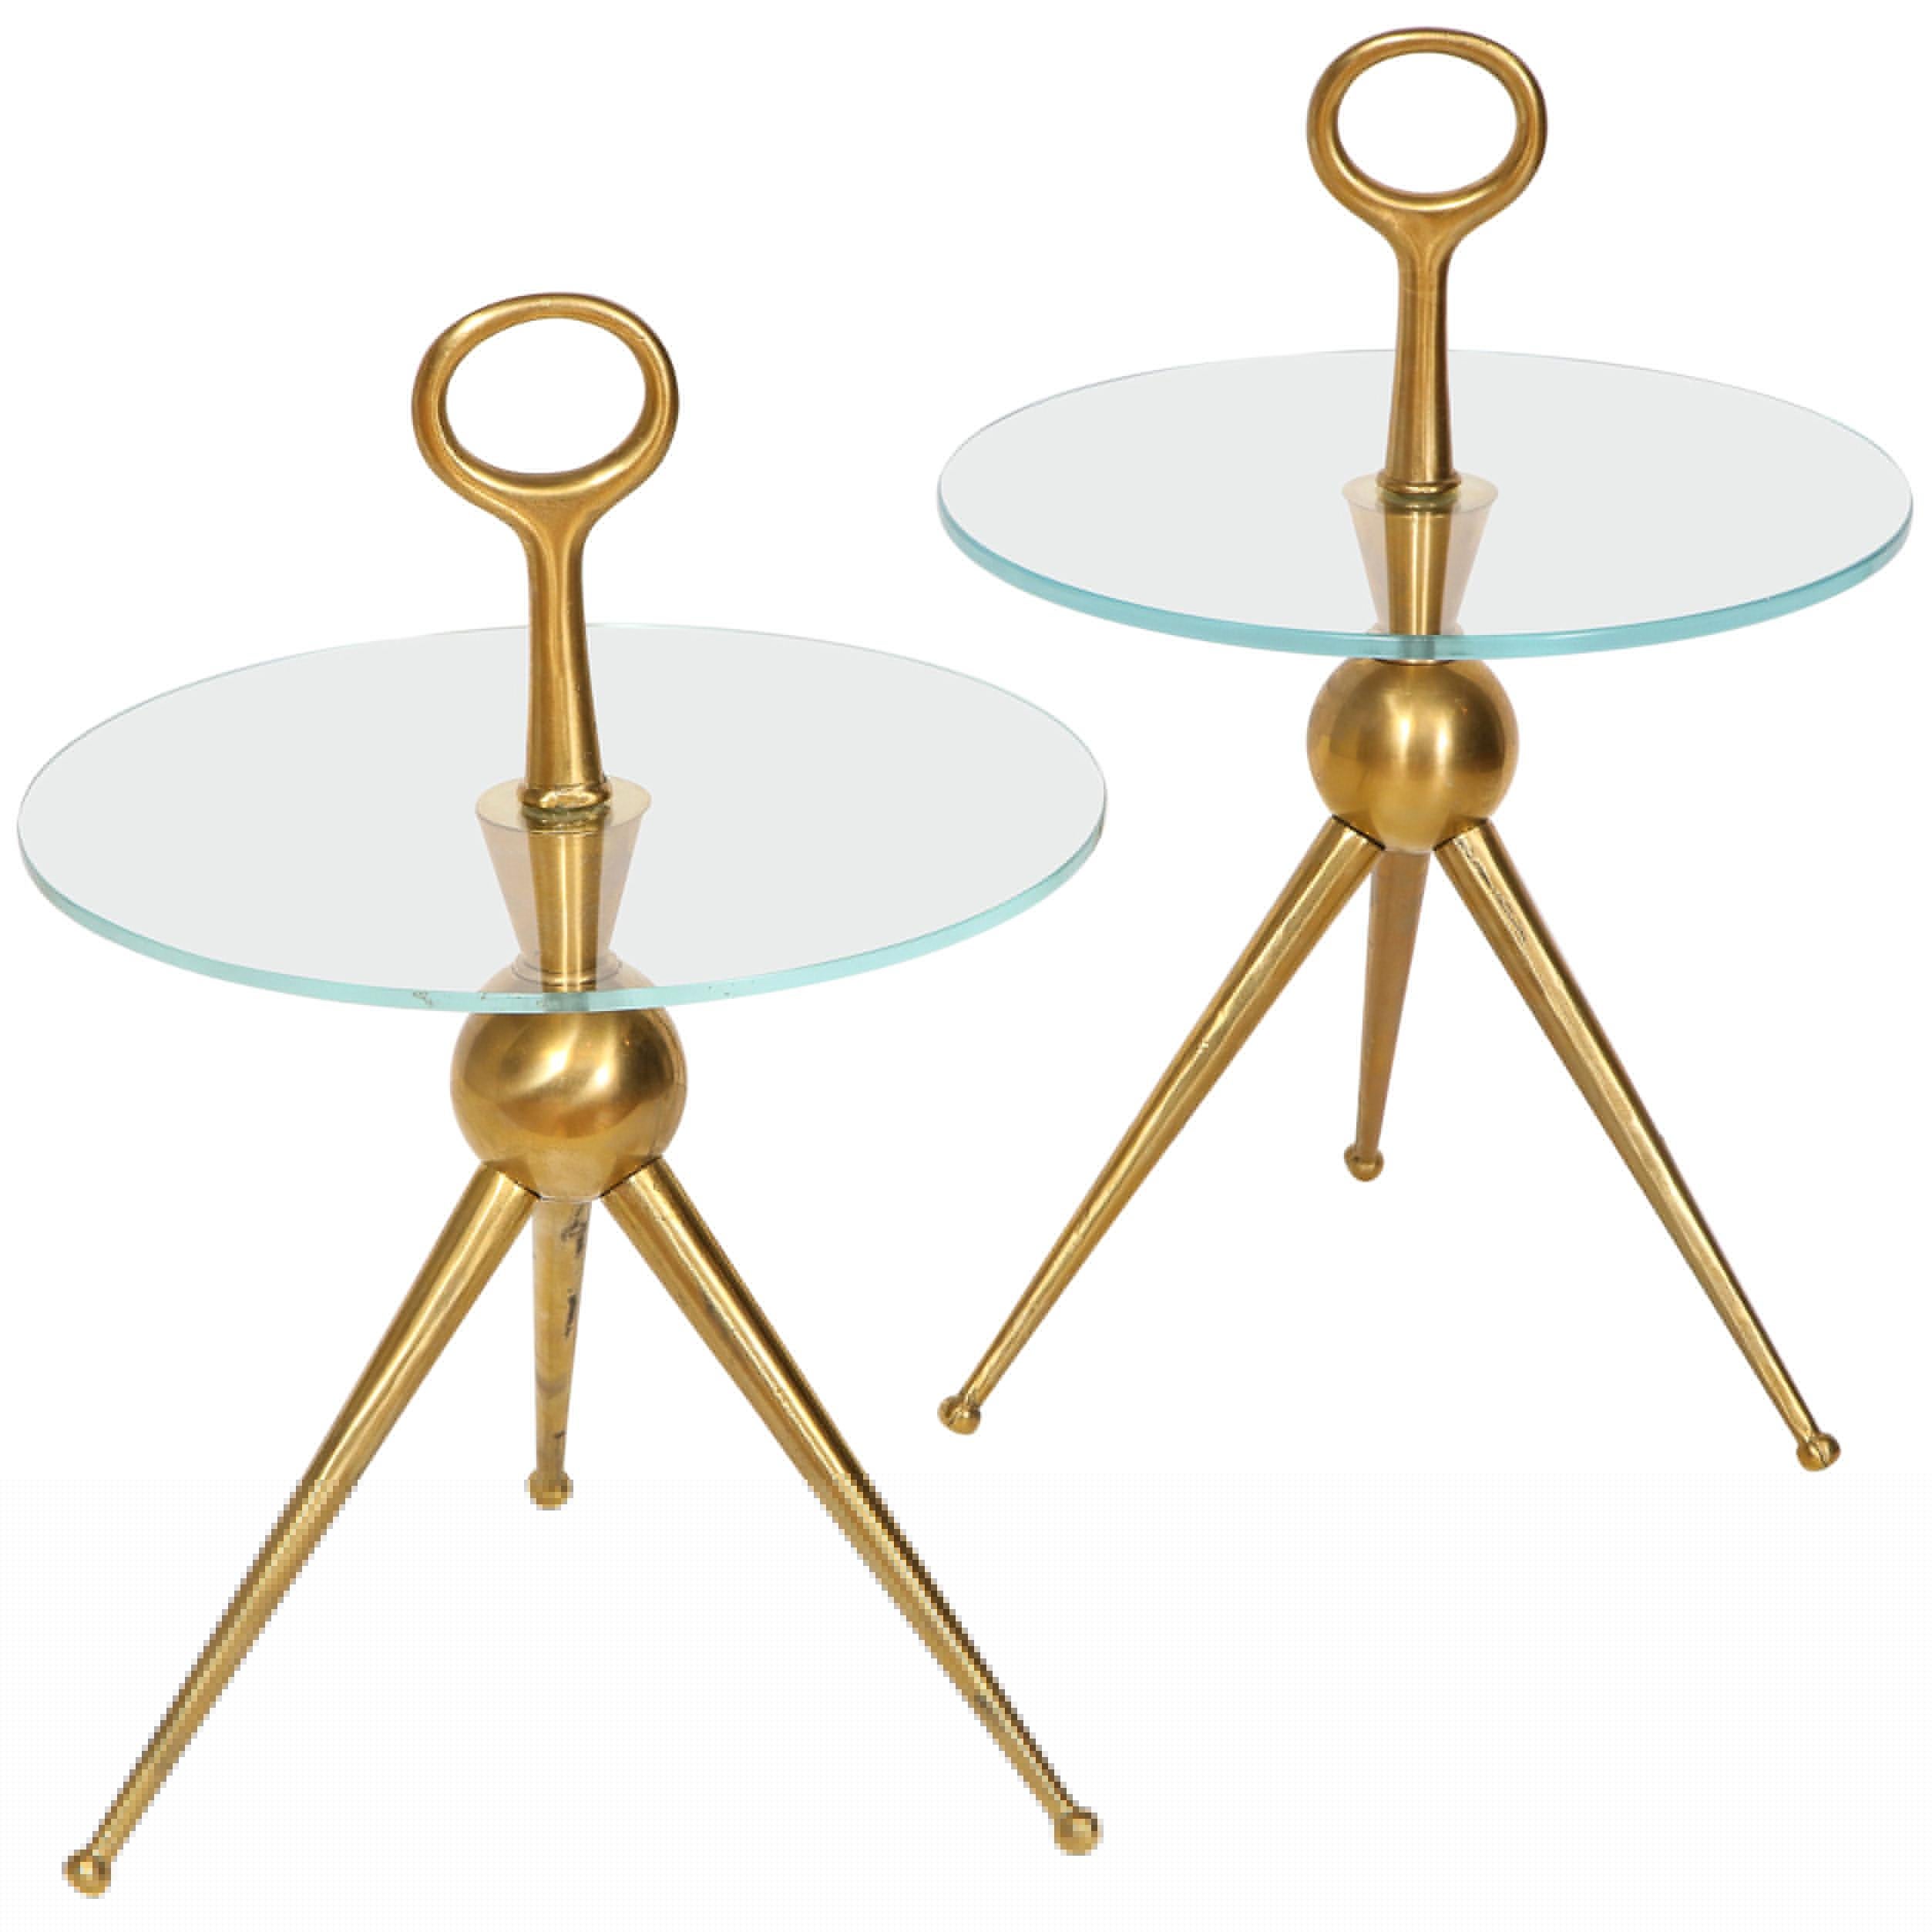 Pair of Handcrafted Solid Bronze and Glass Tripod Martini Side Tables, Italy